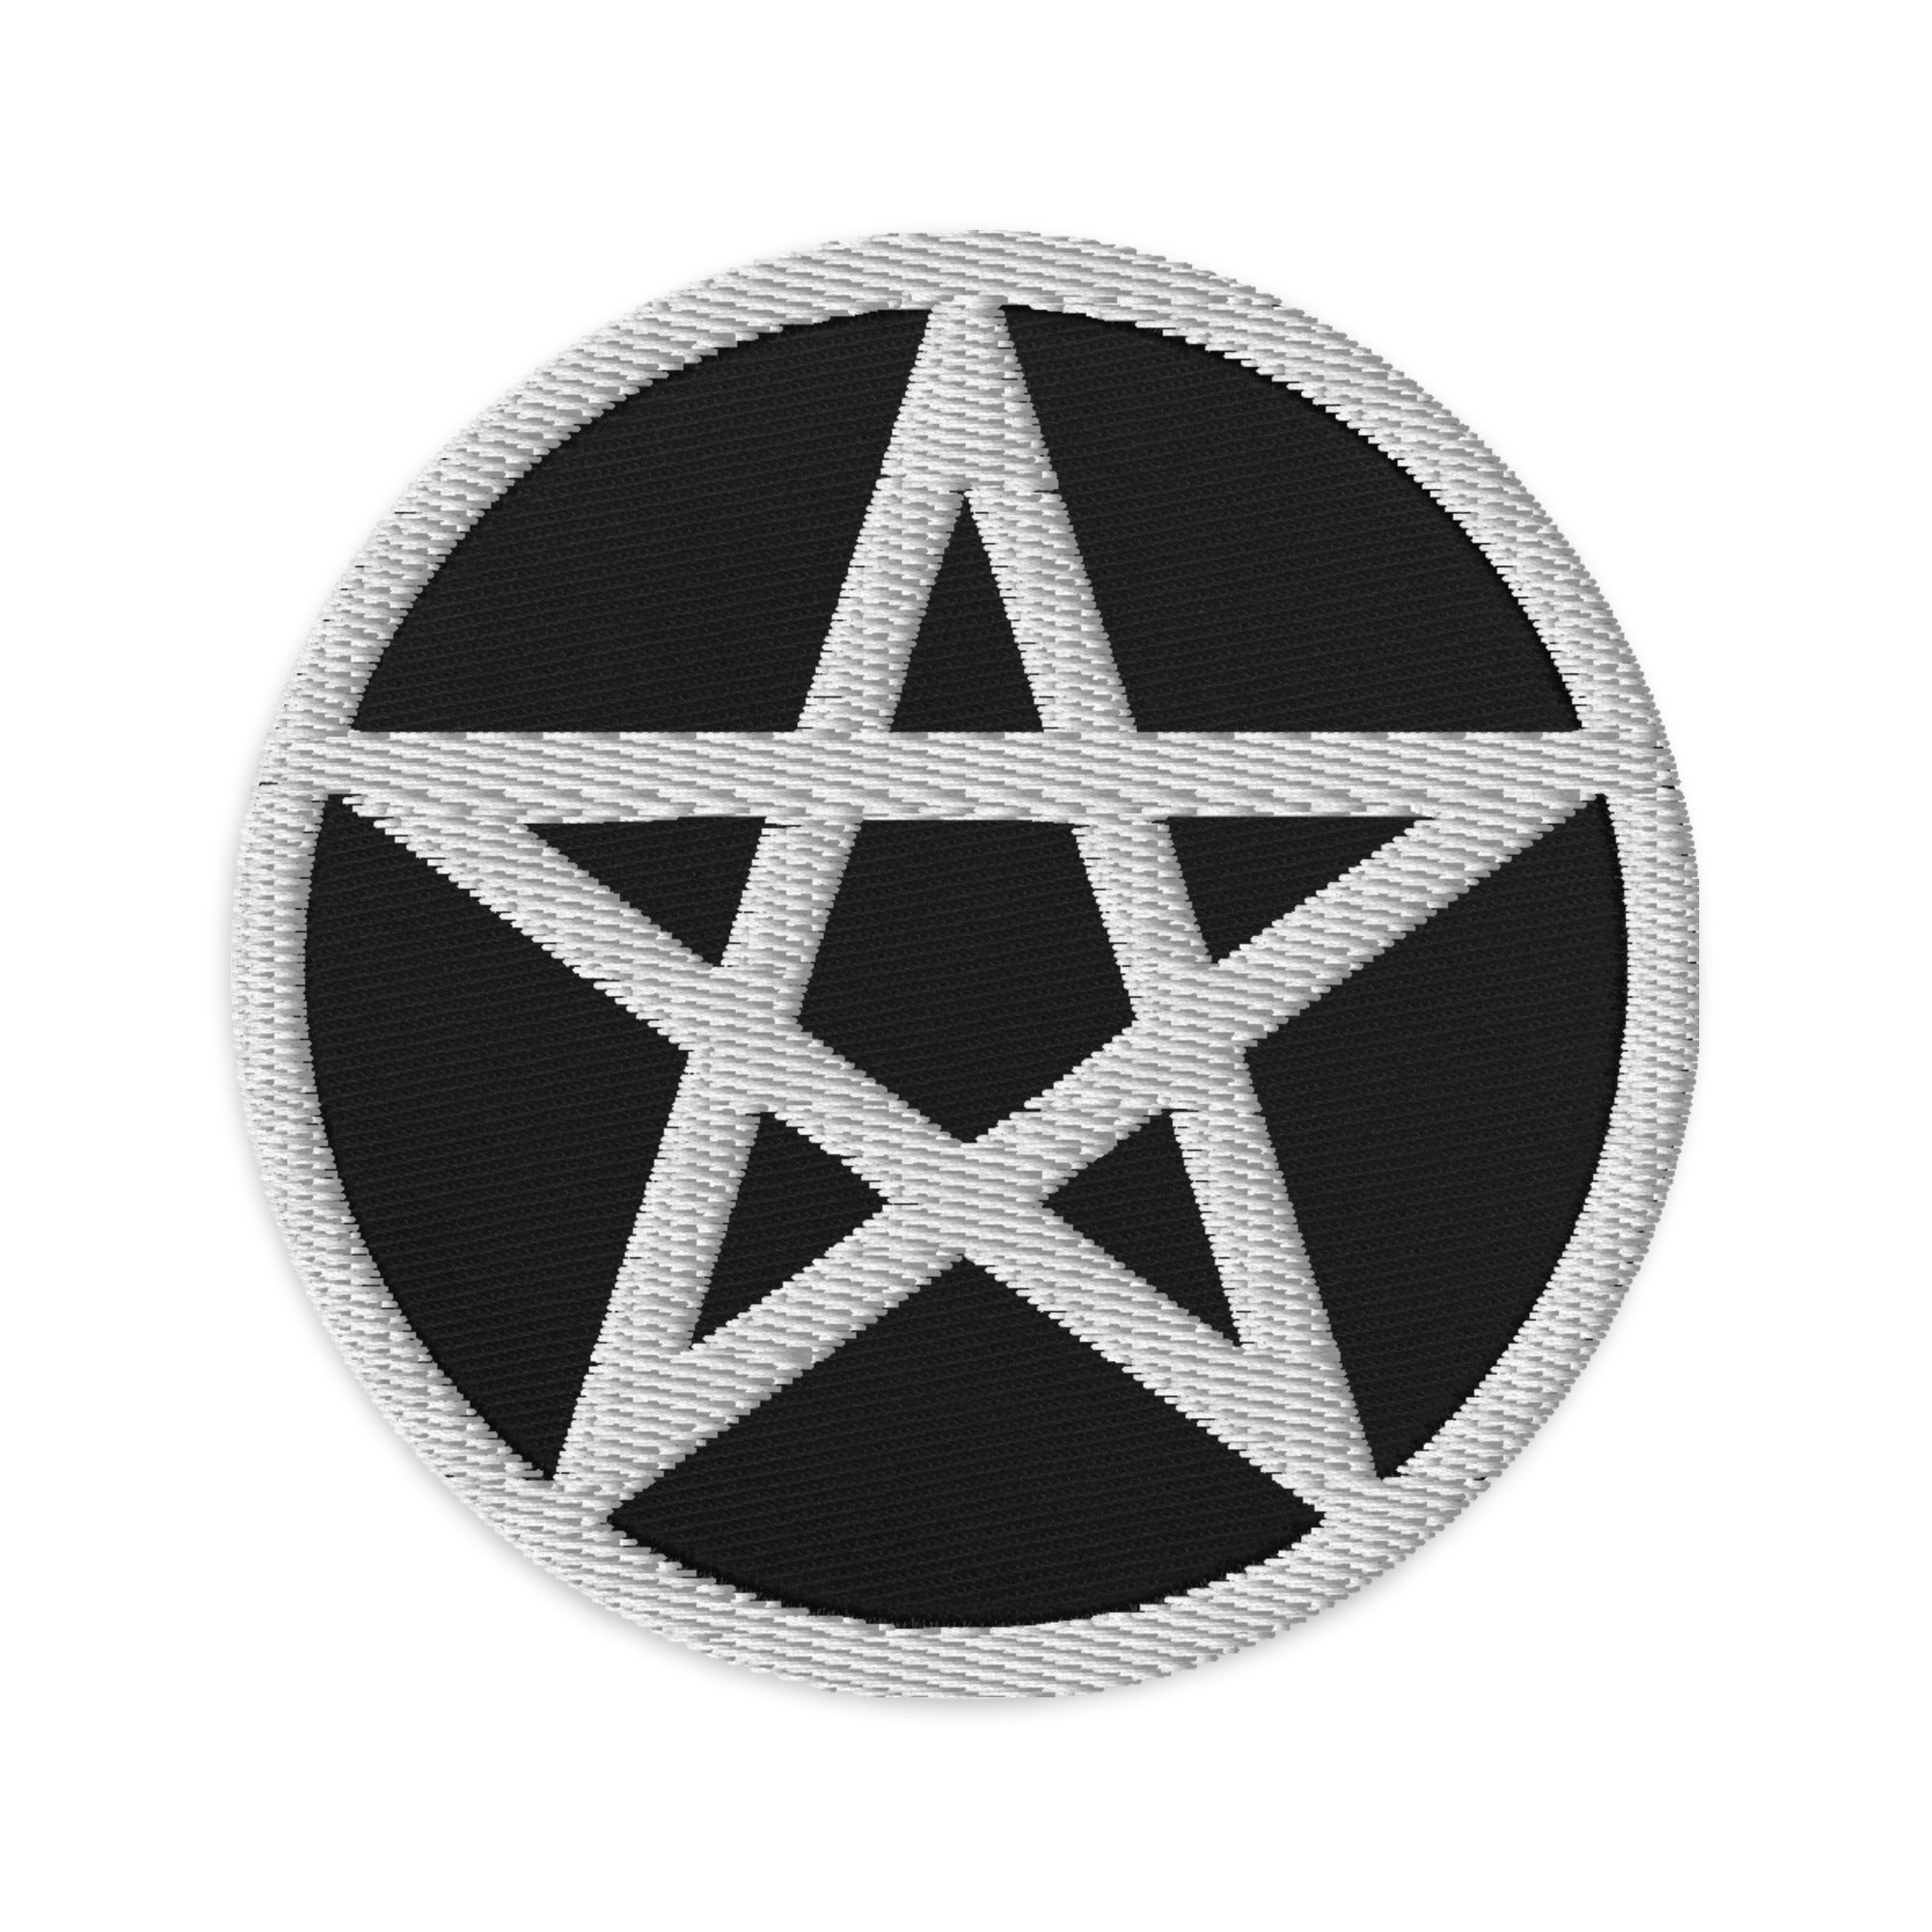 Wiccan Witchcraft Pentagram Embroidered Patch Pagan Ritual - Edge of Life Designs